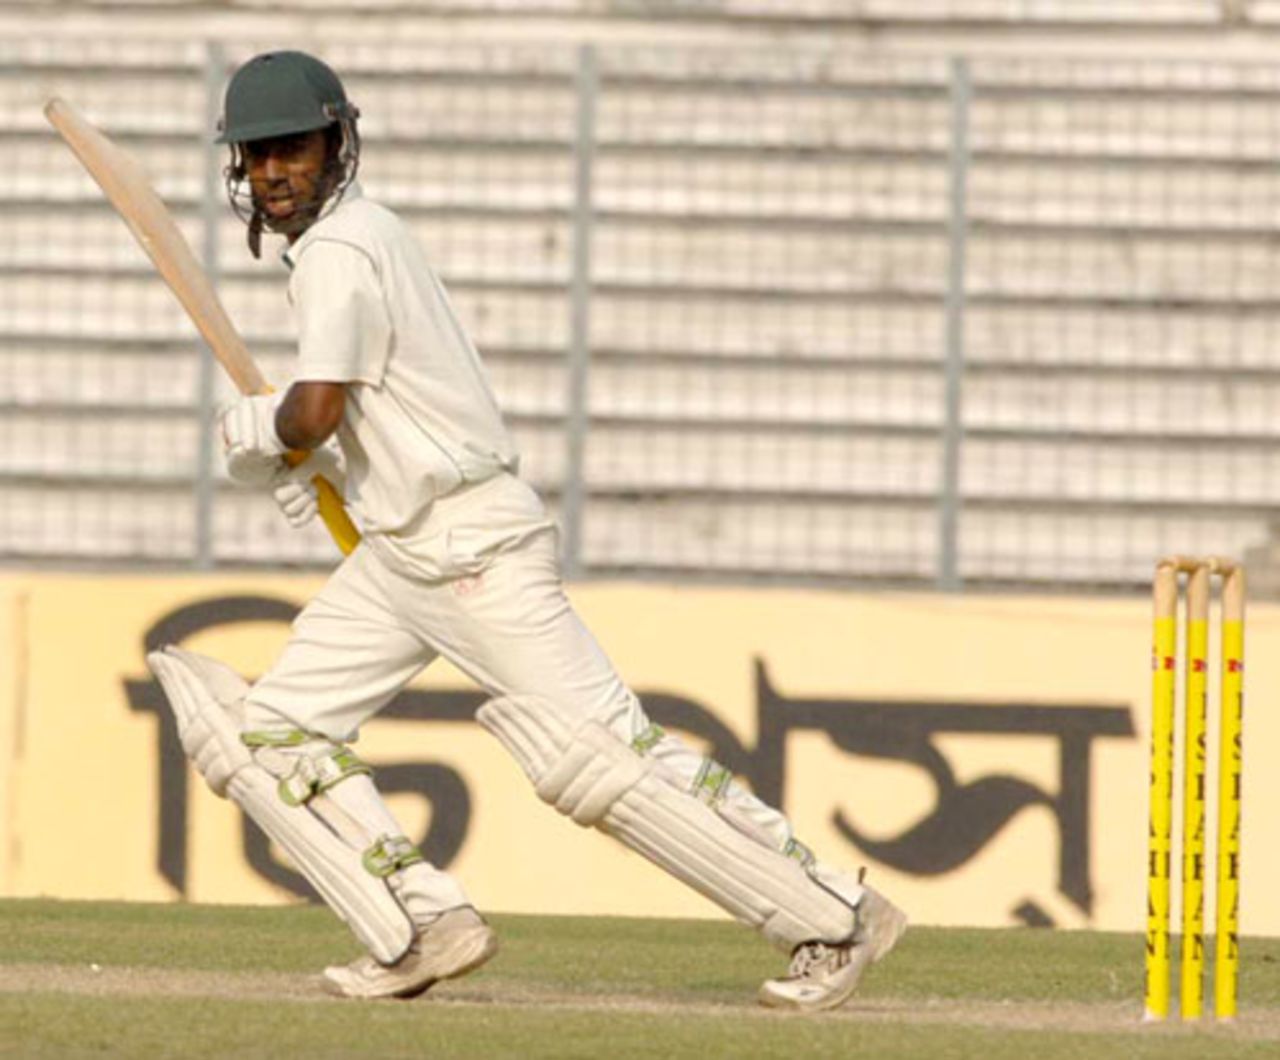 Elias Sunny  pushes the ball to the off side, Dhaka Division v Sylhet Division, Mirpur, 2nd day, November 25, 2008